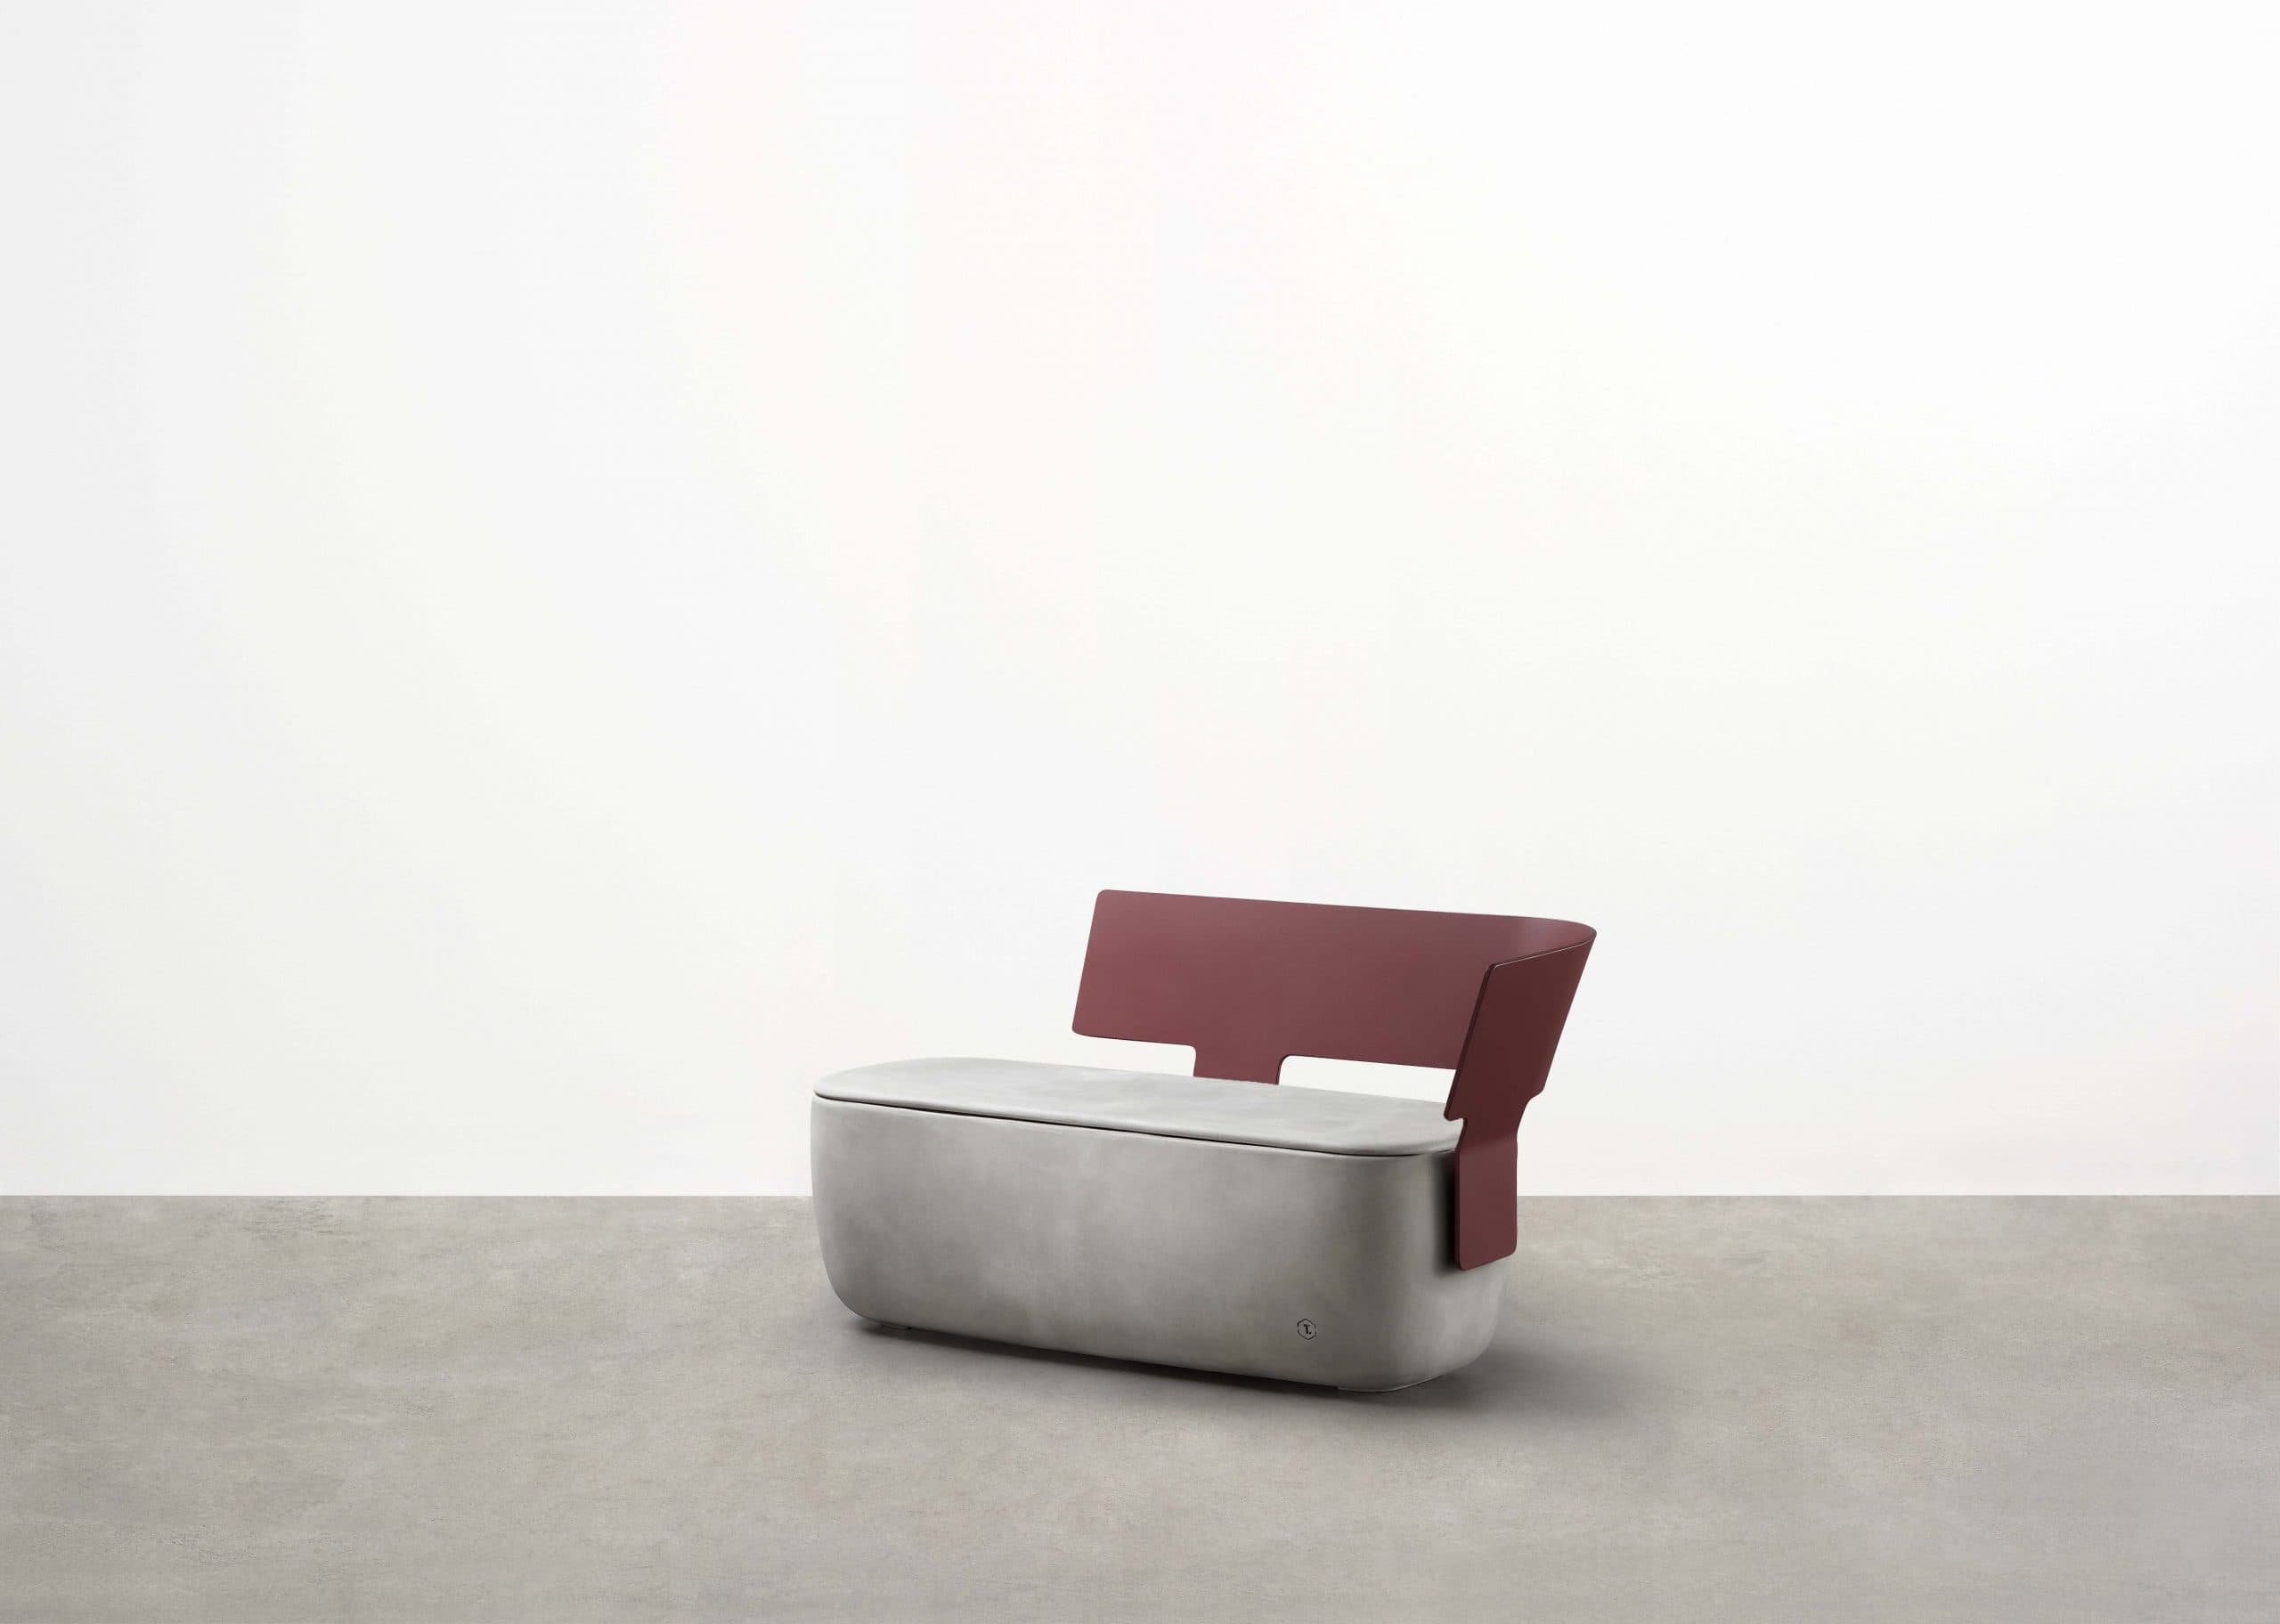 Lightweight Concrete Bench Seat with Backrest